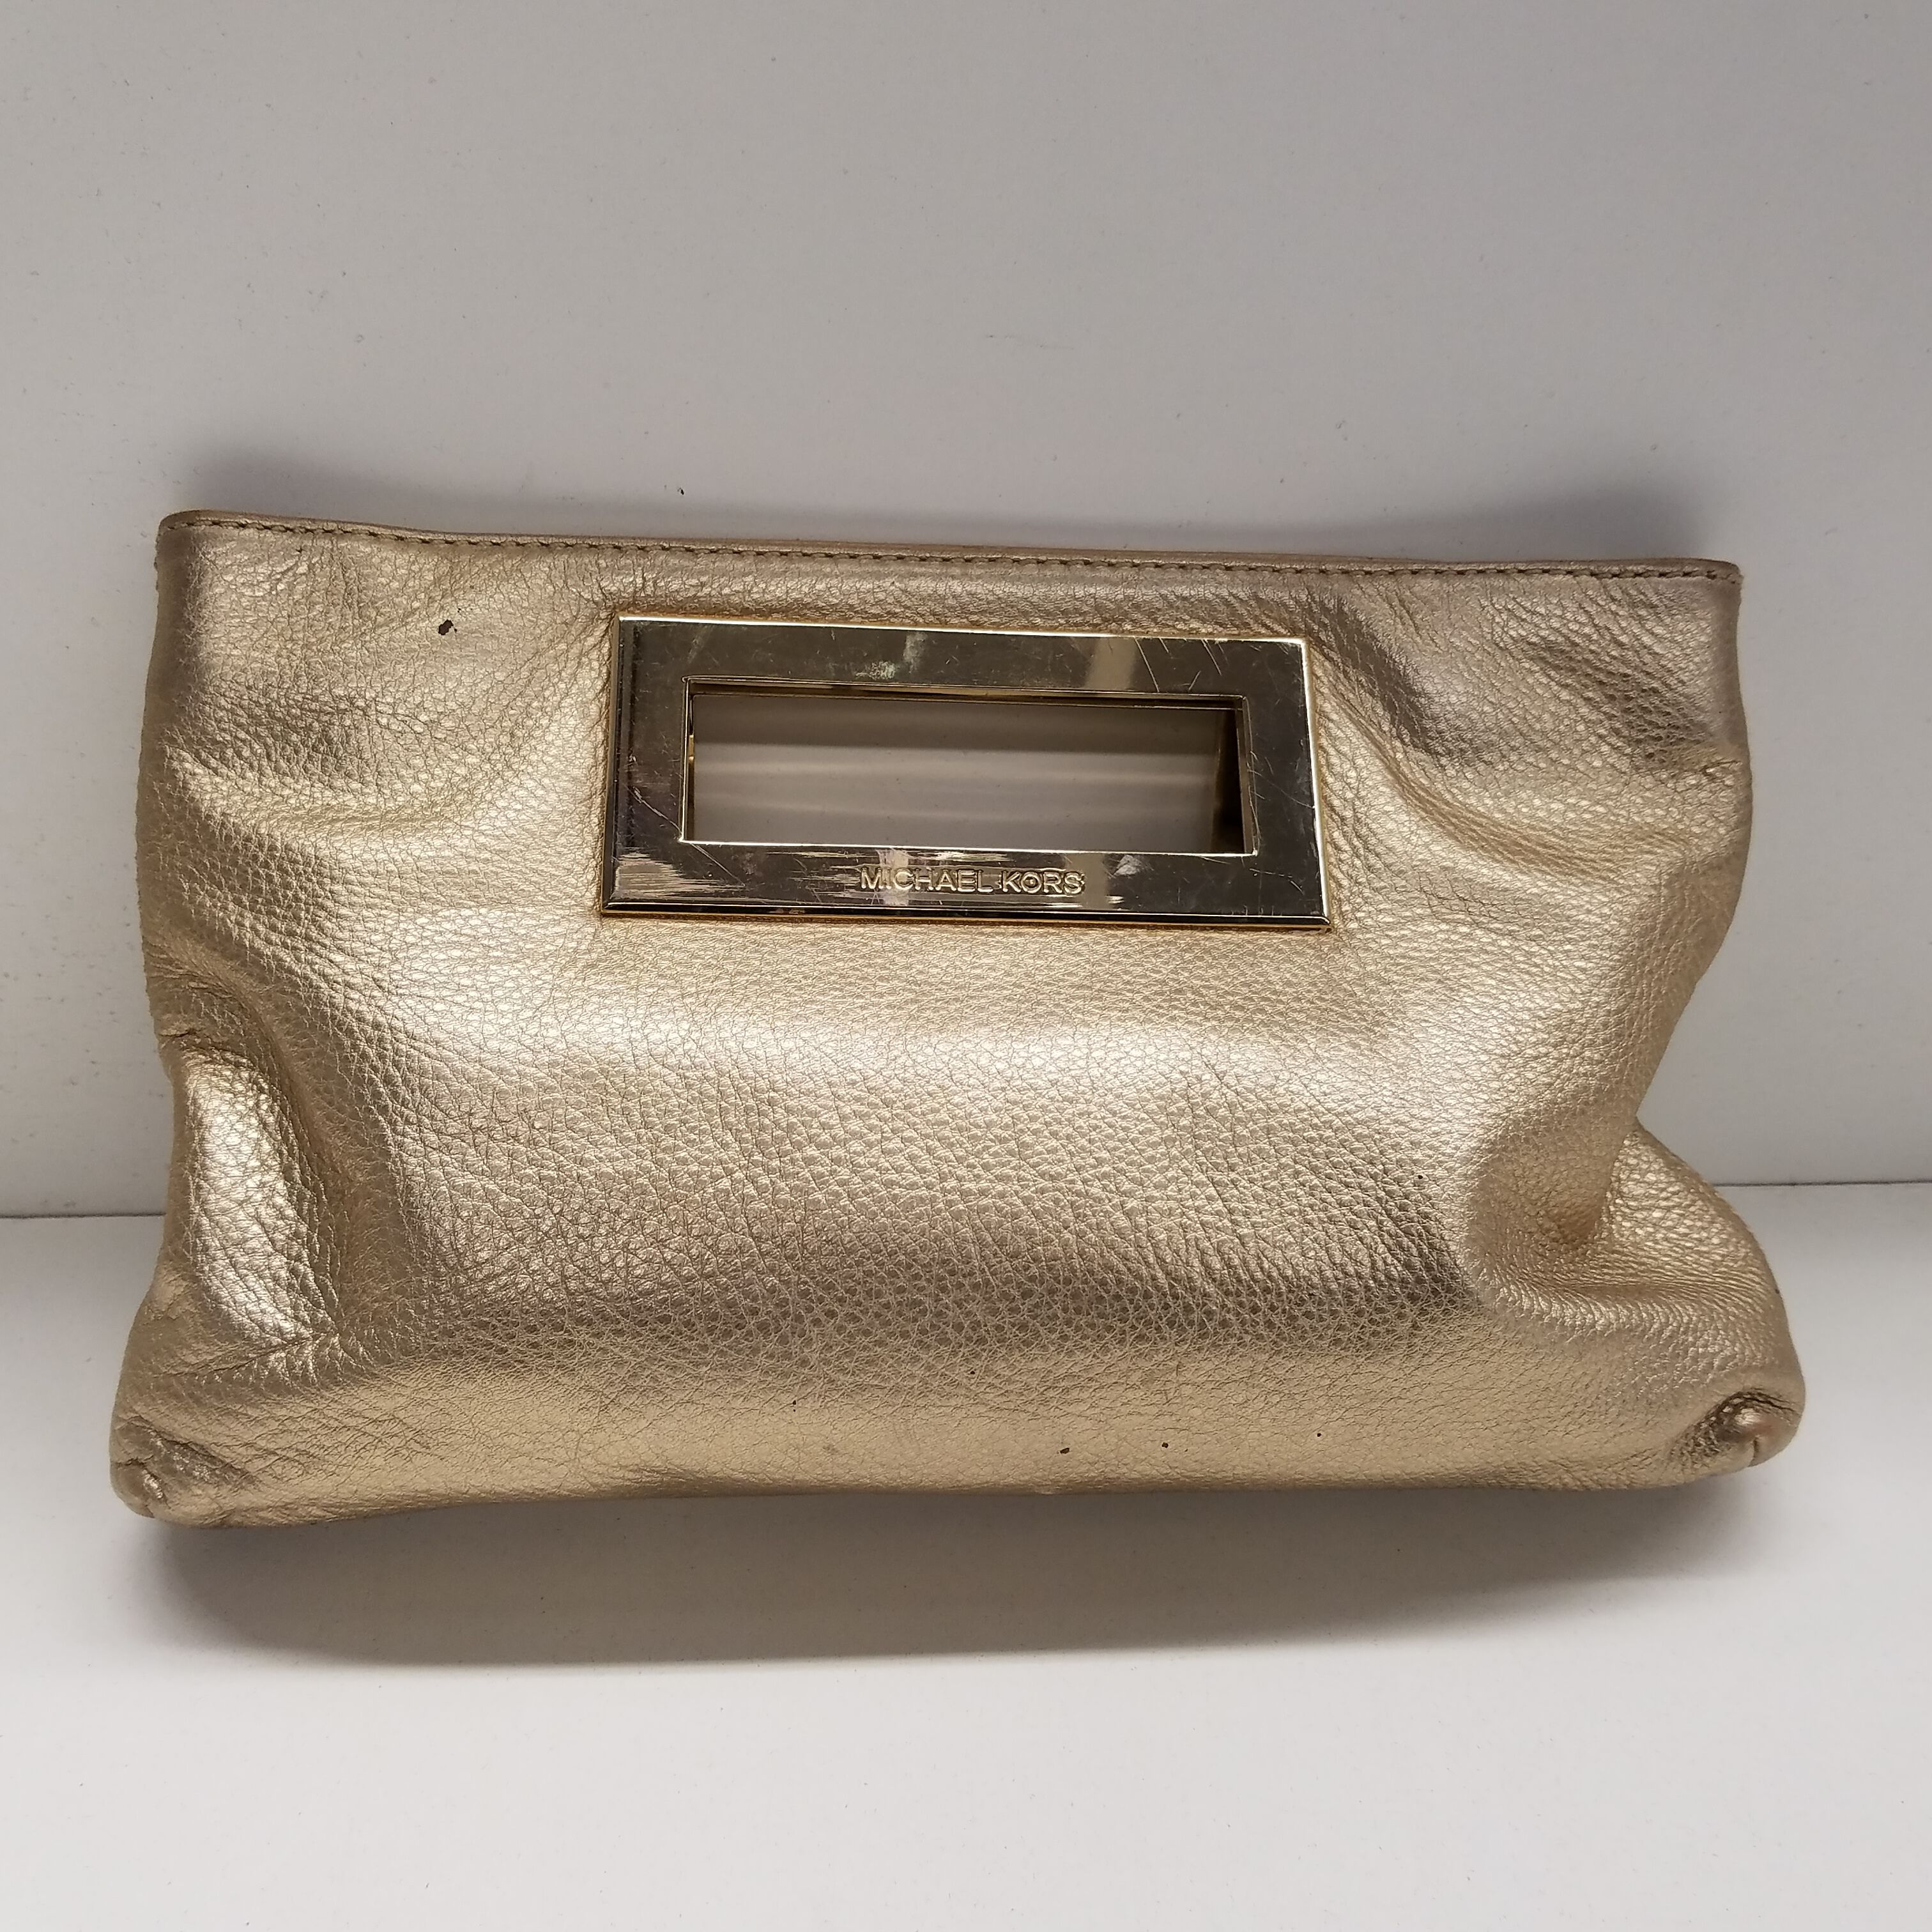 MICHAEL KORS Michael chain clutch in laminated leather  Gold  Michael  Kors mini bag 32F7MFDW6M online on GIGLIOCOM